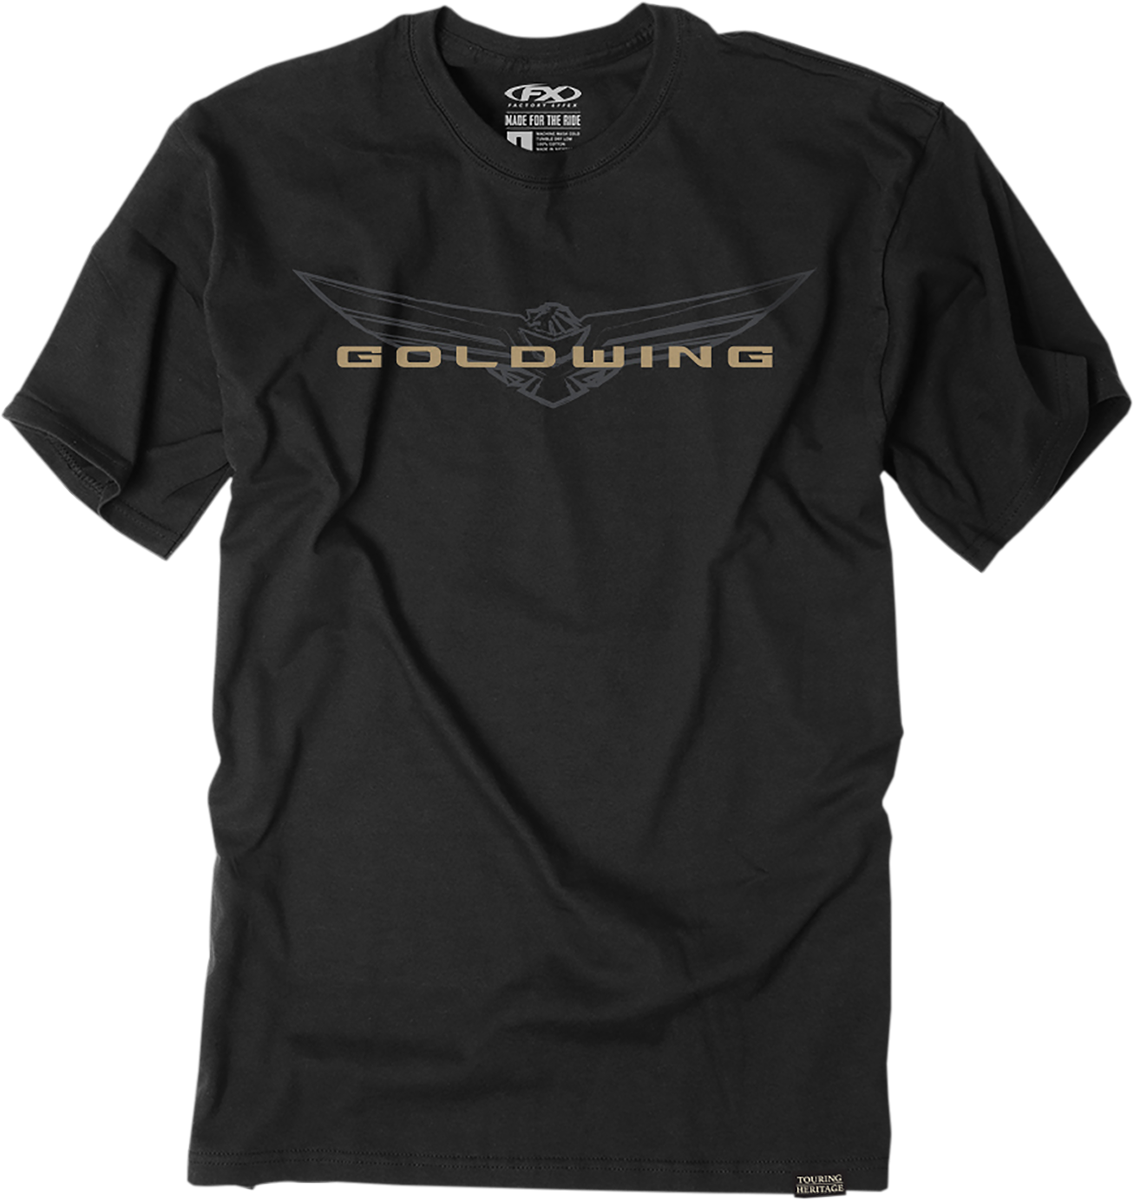 FACTORY EFFEX Goldwing Sketched T-Shirt- Black - Large 25-87814